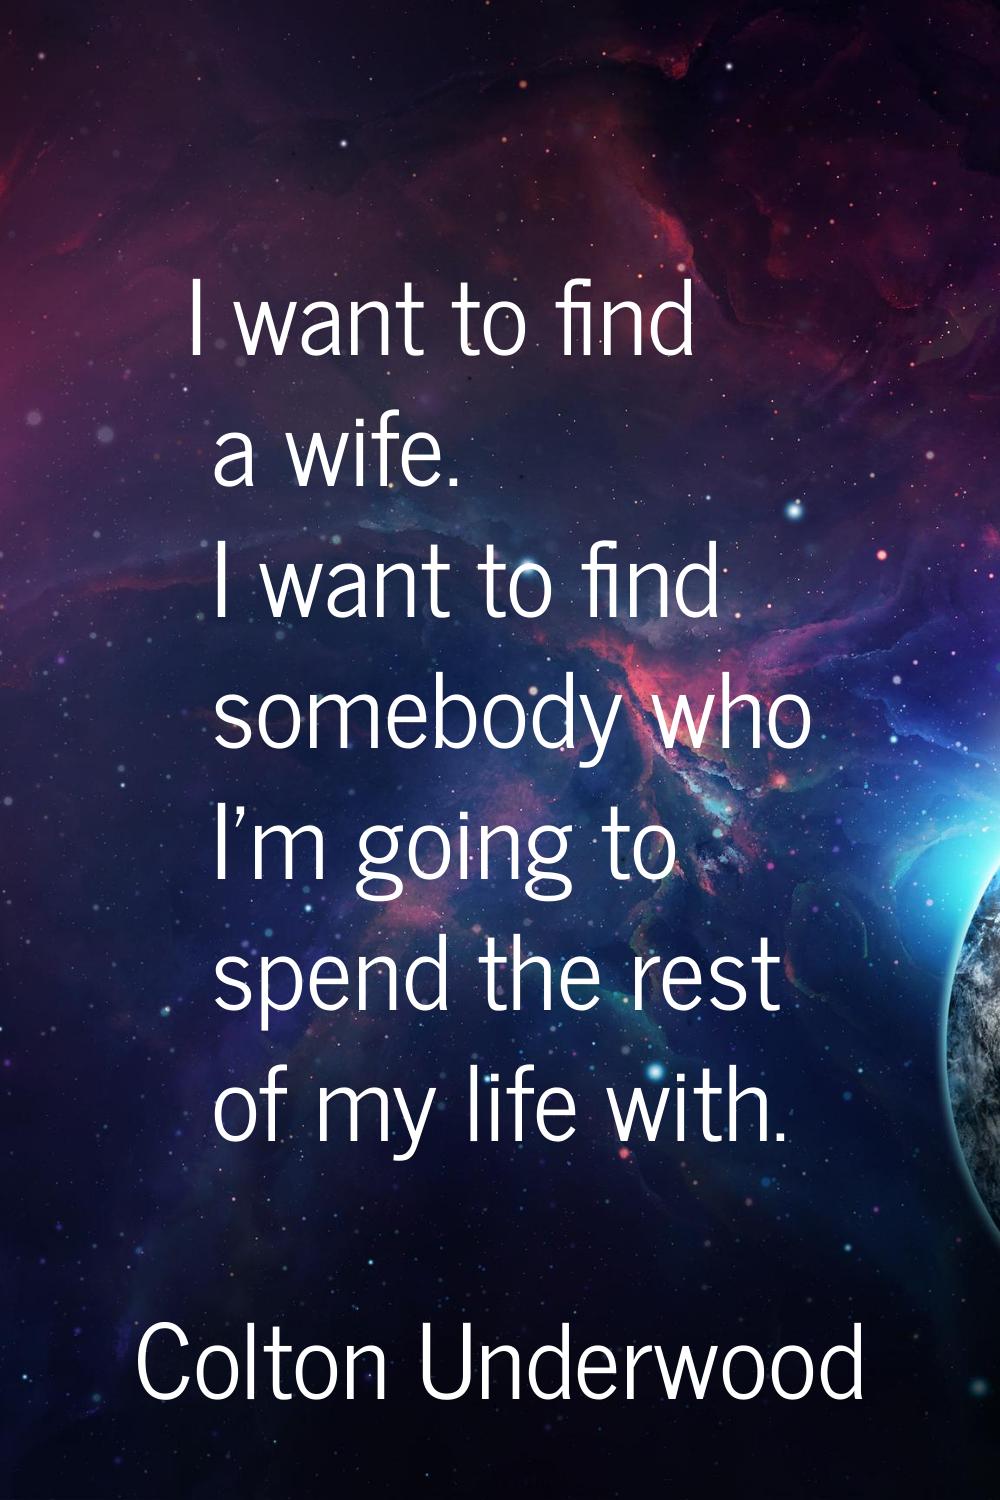 I want to find a wife. I want to find somebody who I'm going to spend the rest of my life with.